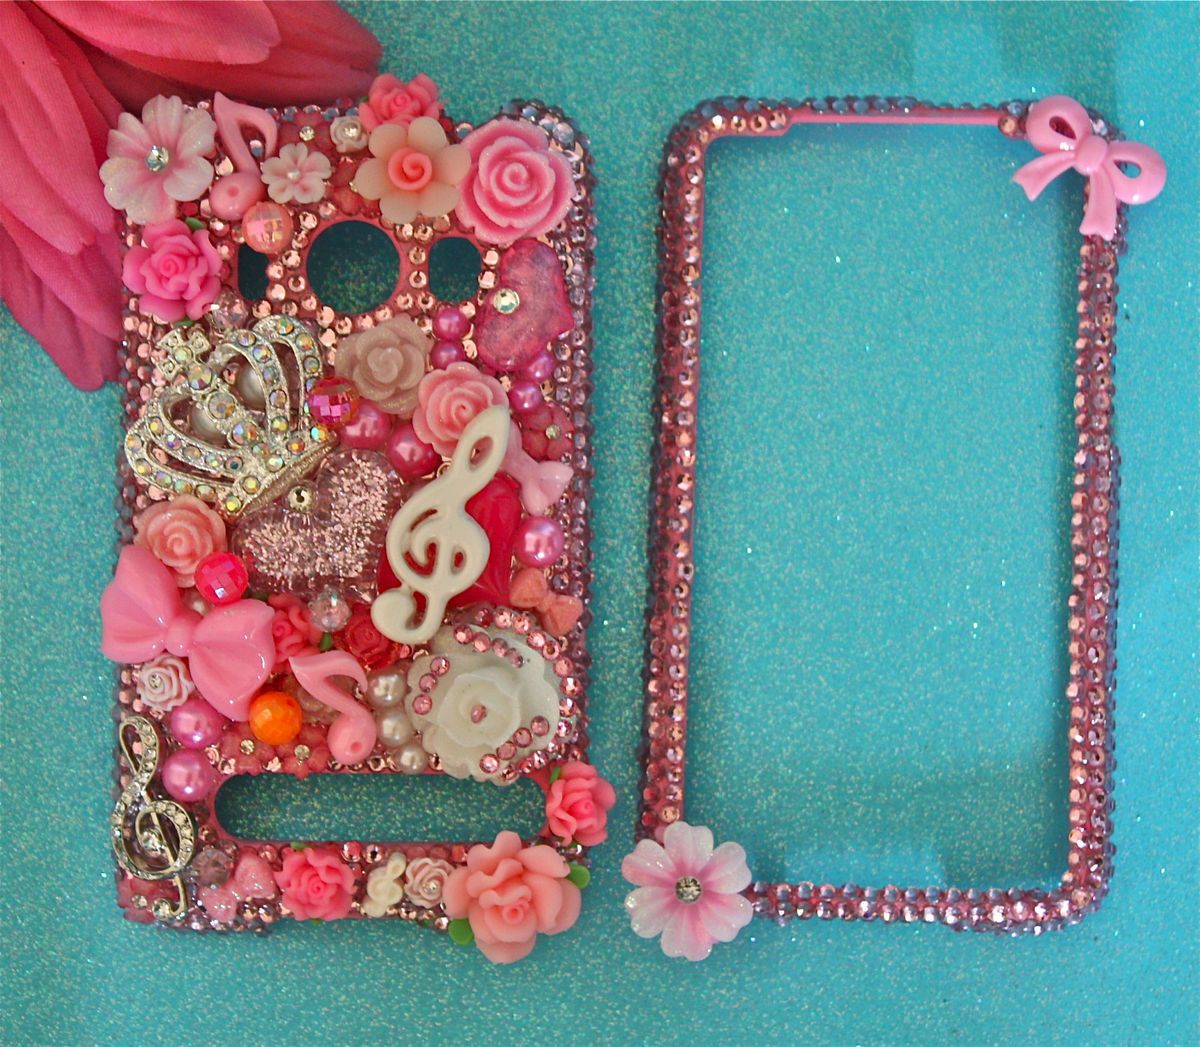   HTC EVO 4G PINK CRYSTAL JUICY CUTE BLING DECO 3D PHONE CASE COVER